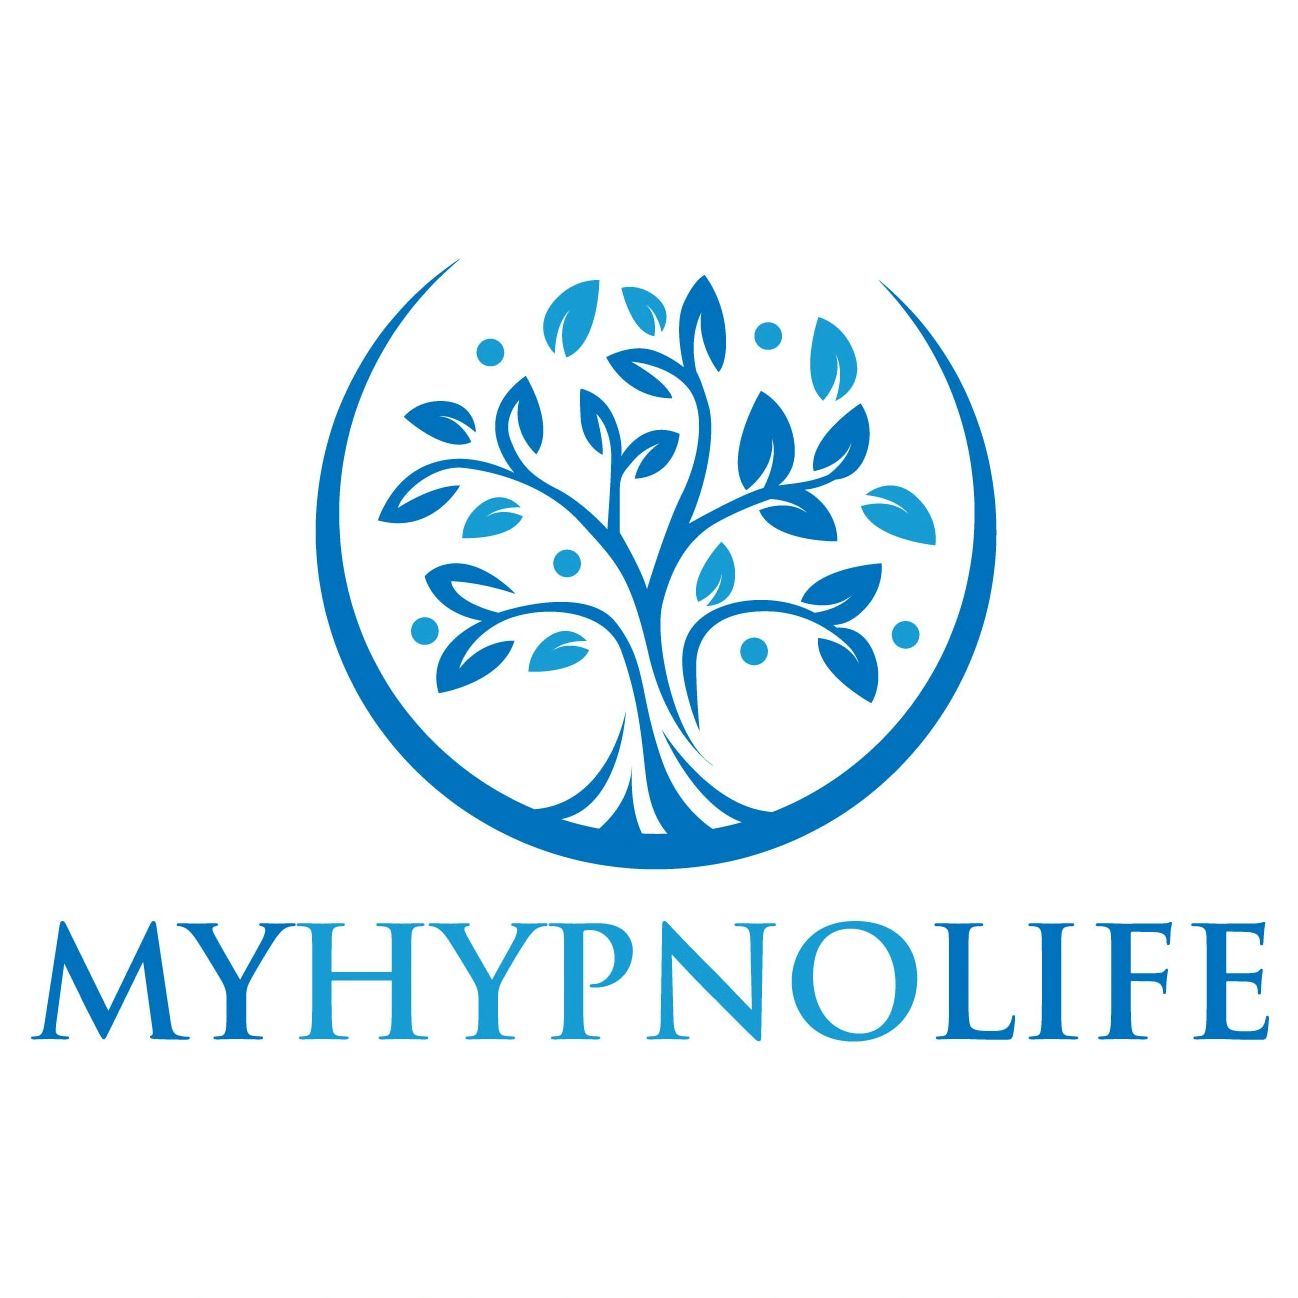 Tree of life
Hypnotherapy logo